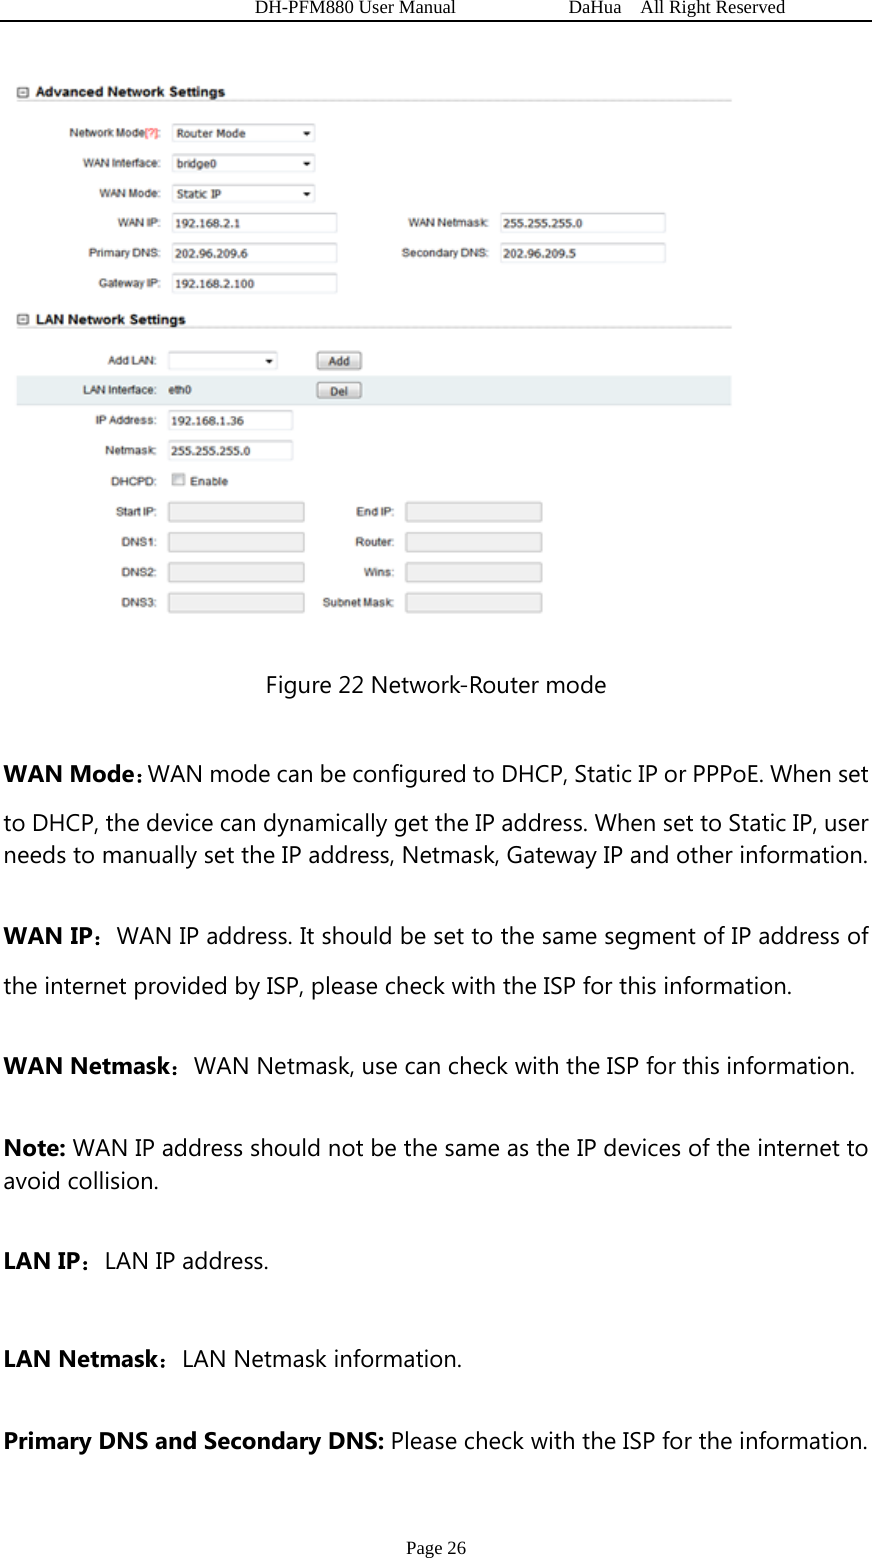   DH-PFM880 User Manual            DaHua  All Right Reserved Page 26  Figure 22 Network-Router mode WAN Mode：WAN mode can be configured to DHCP, Static IP or PPPoE. When set to DHCP, the device can dynamically get the IP address. When set to Static IP, user needs to manually set the IP address, Netmask, Gateway IP and other information. WAN IP：WAN IP address. It should be set to the same segment of IP address of the internet provided by ISP, please check with the ISP for this information. WAN Netmask：WAN Netmask, use can check with the ISP for this information. Note: WAN IP address should not be the same as the IP devices of the internet to avoid collision. LAN IP：LAN IP address. LAN Netmask：LAN Netmask information. Primary DNS and Secondary DNS: Please check with the ISP for the information. 